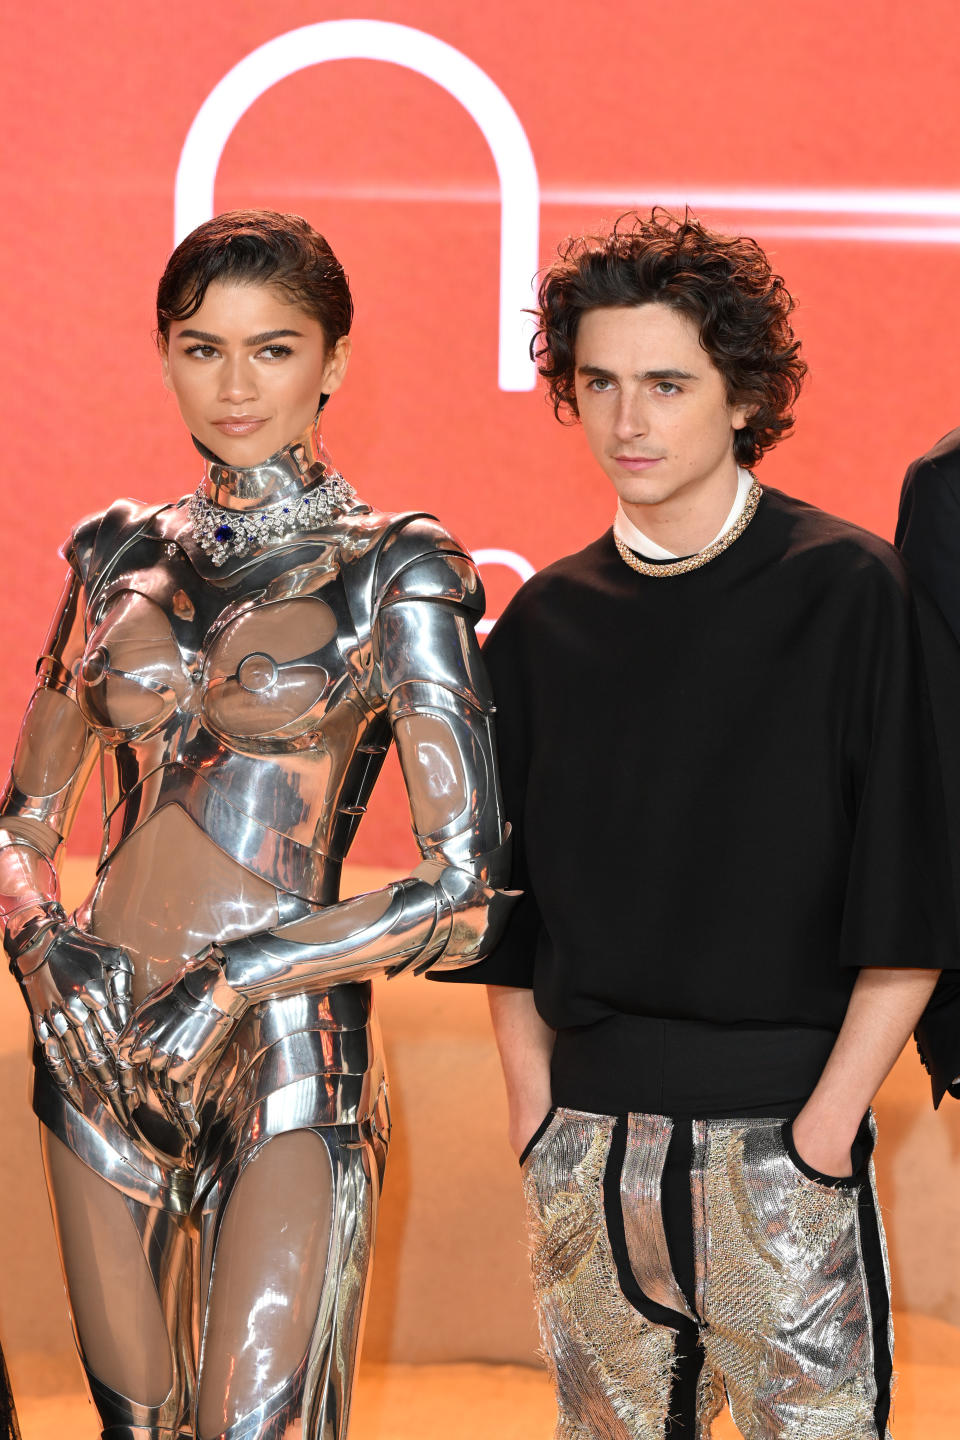 Two individuals on the red carpet. Person on the left in a metallic structured outfit. Person on the right in a black top and shimmery trousers